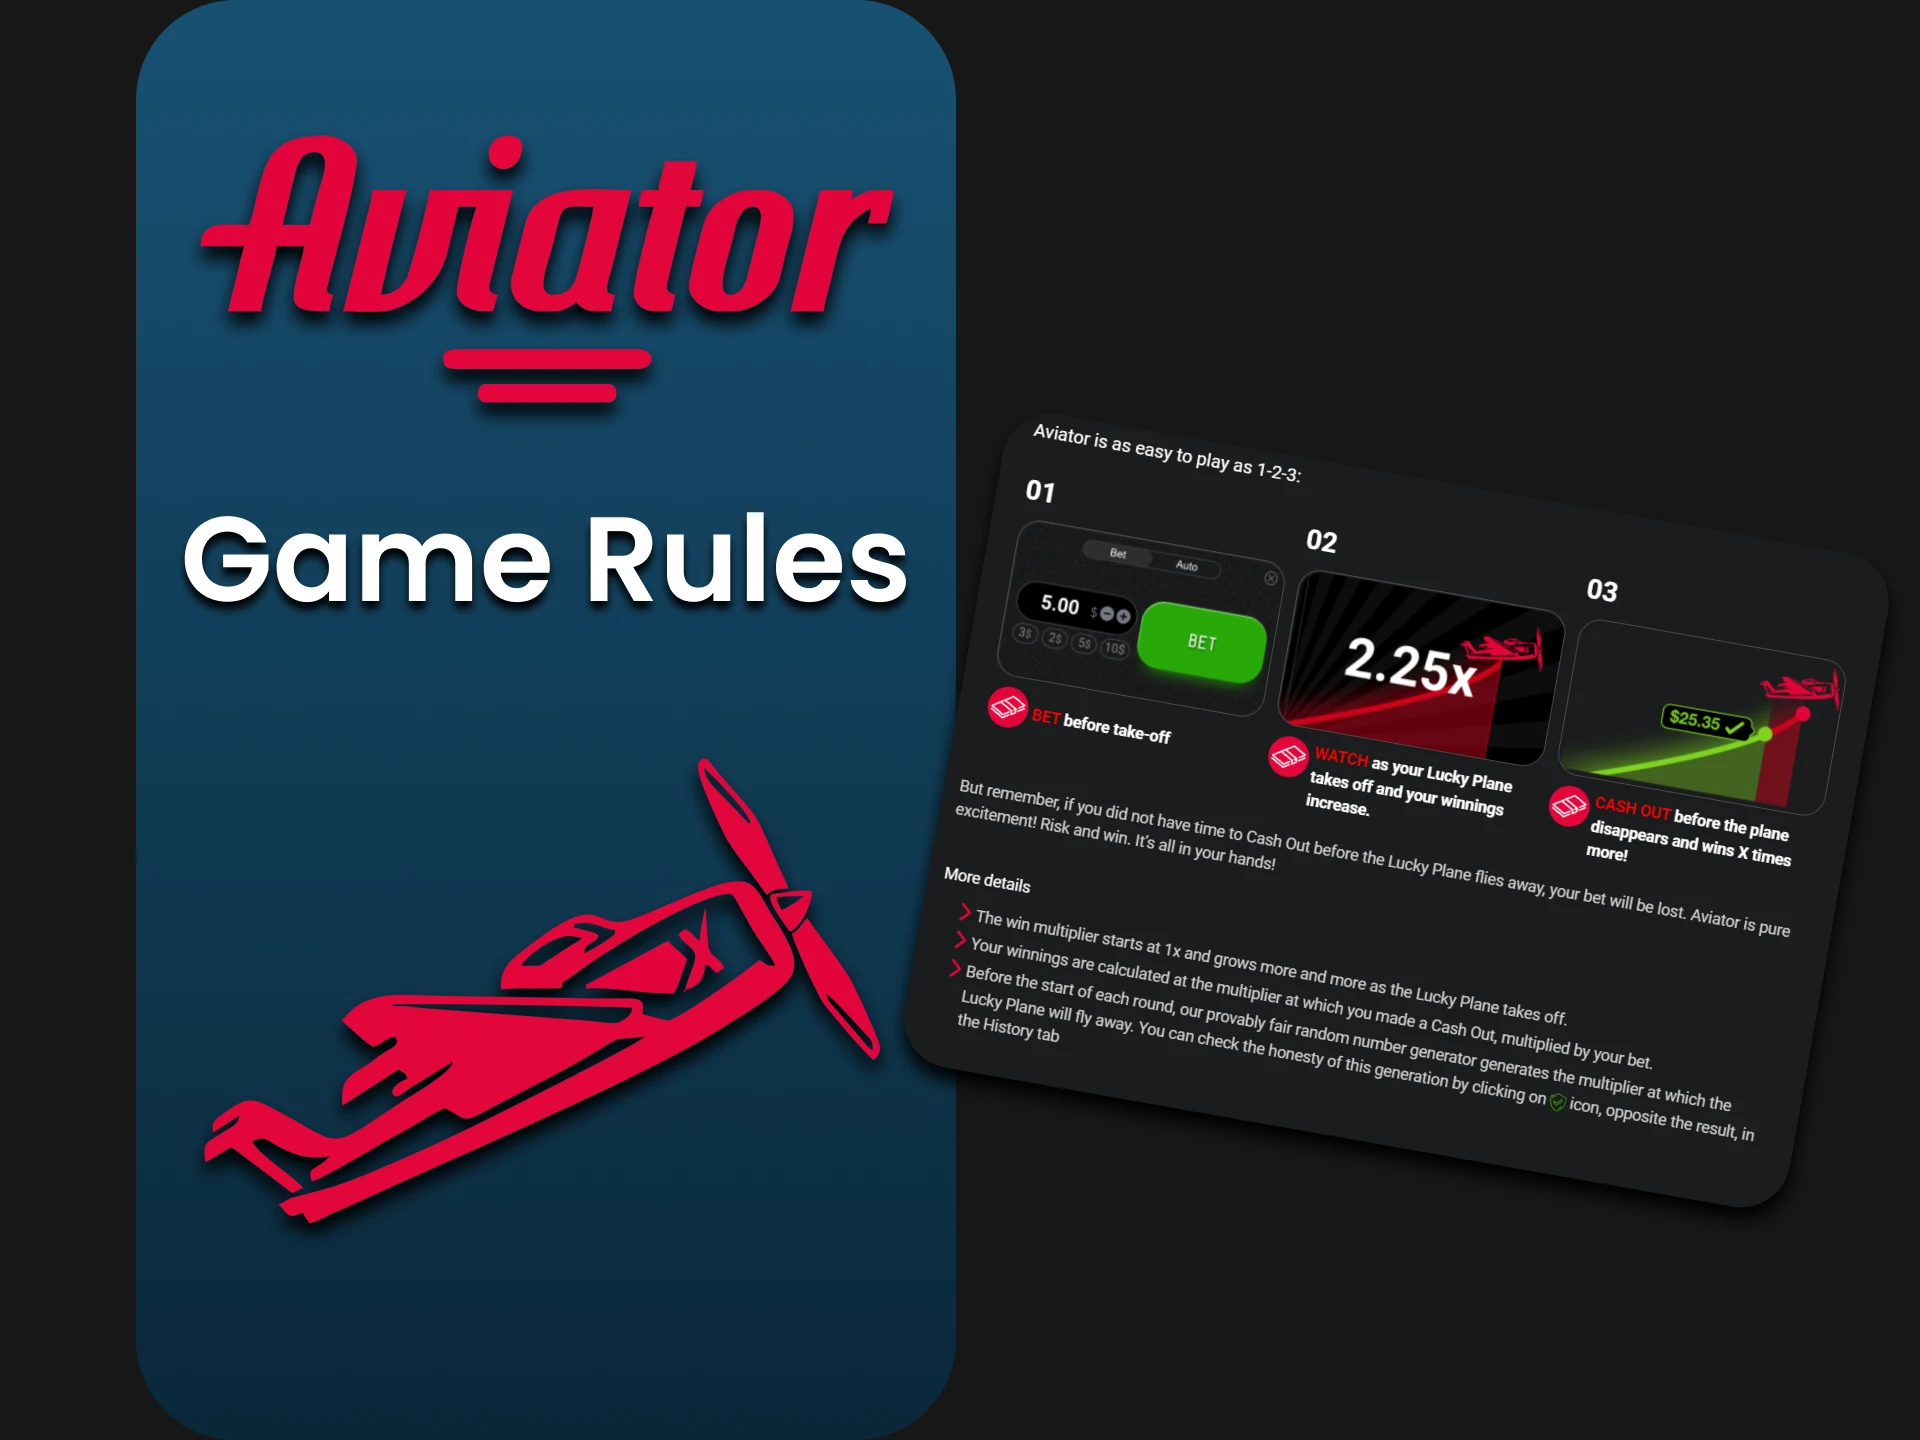 Learn the rules of the game Aviator.